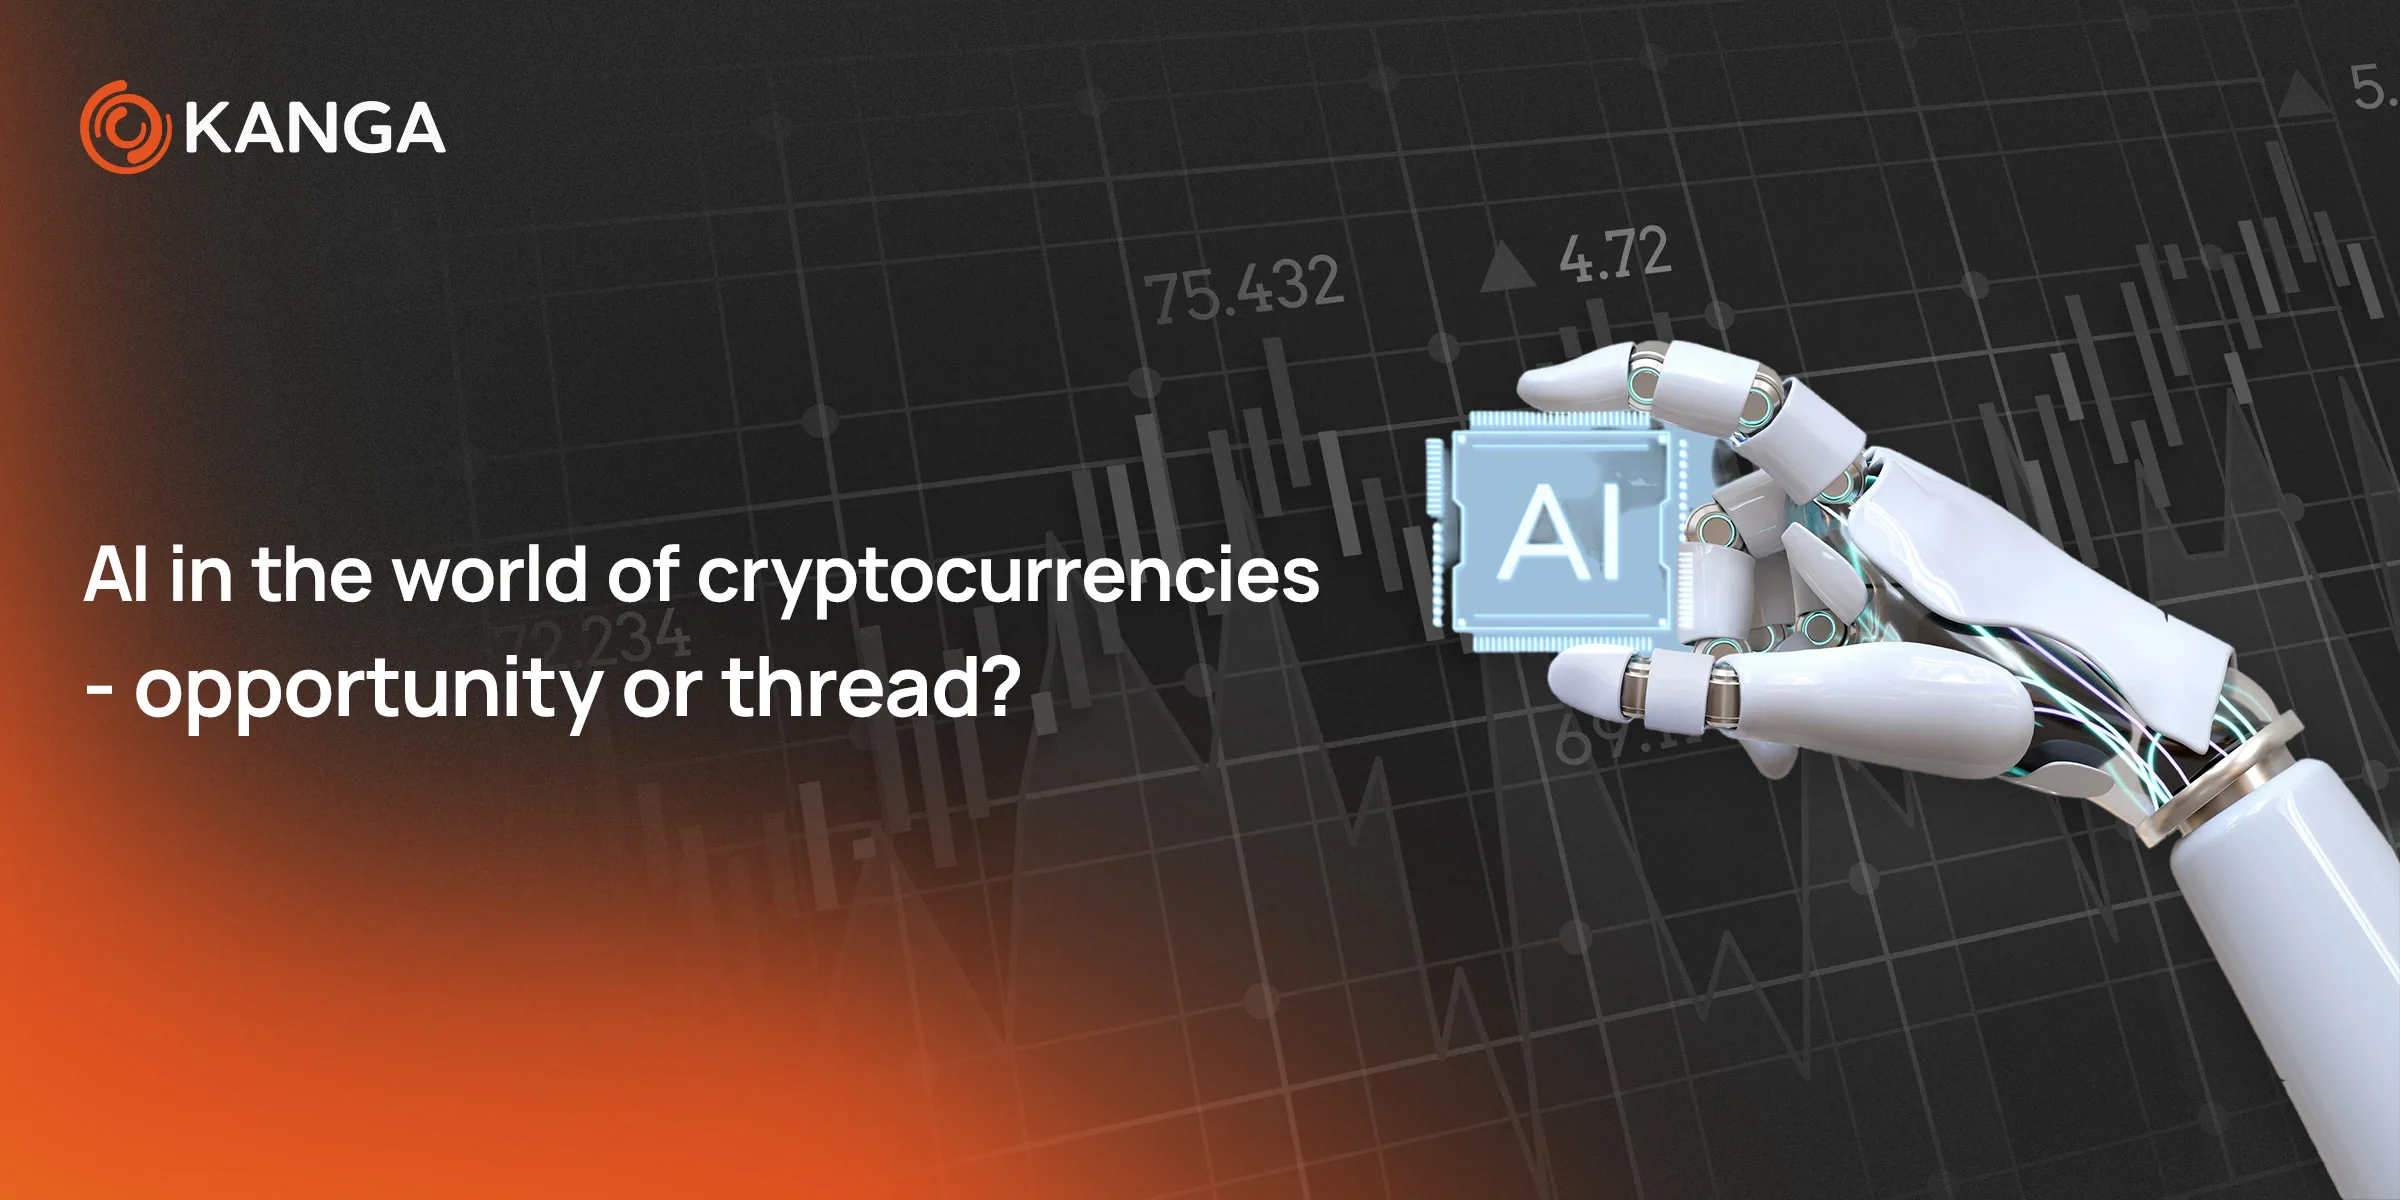 The impact of AI on cryptocurrency analysis and investments